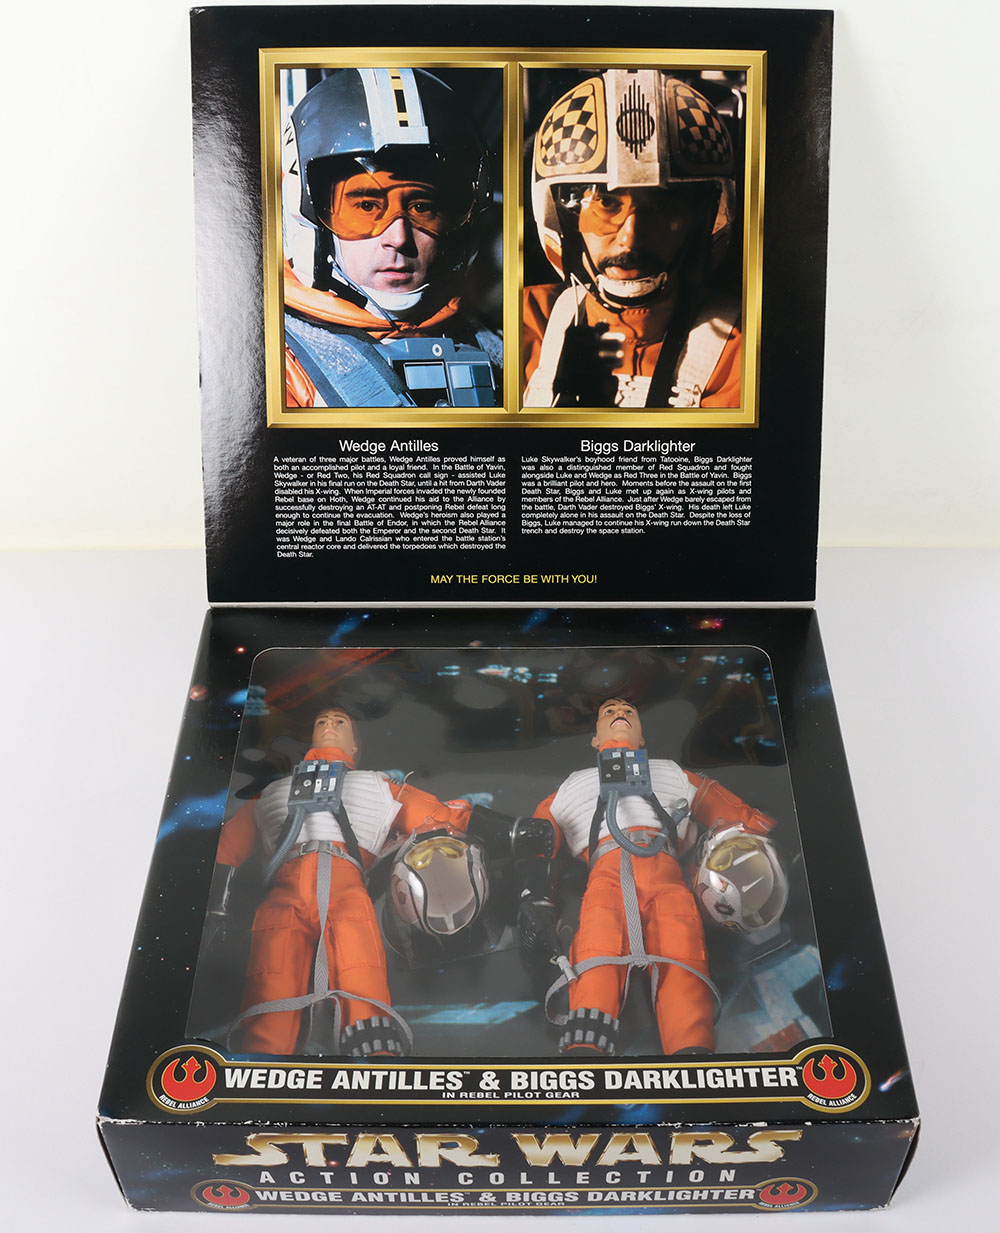 Star Wars Action Collection Kenner 1996-98 Wedge Antilles and Biggs Darklighter in Rebel Pilot Gear - Image 4 of 8